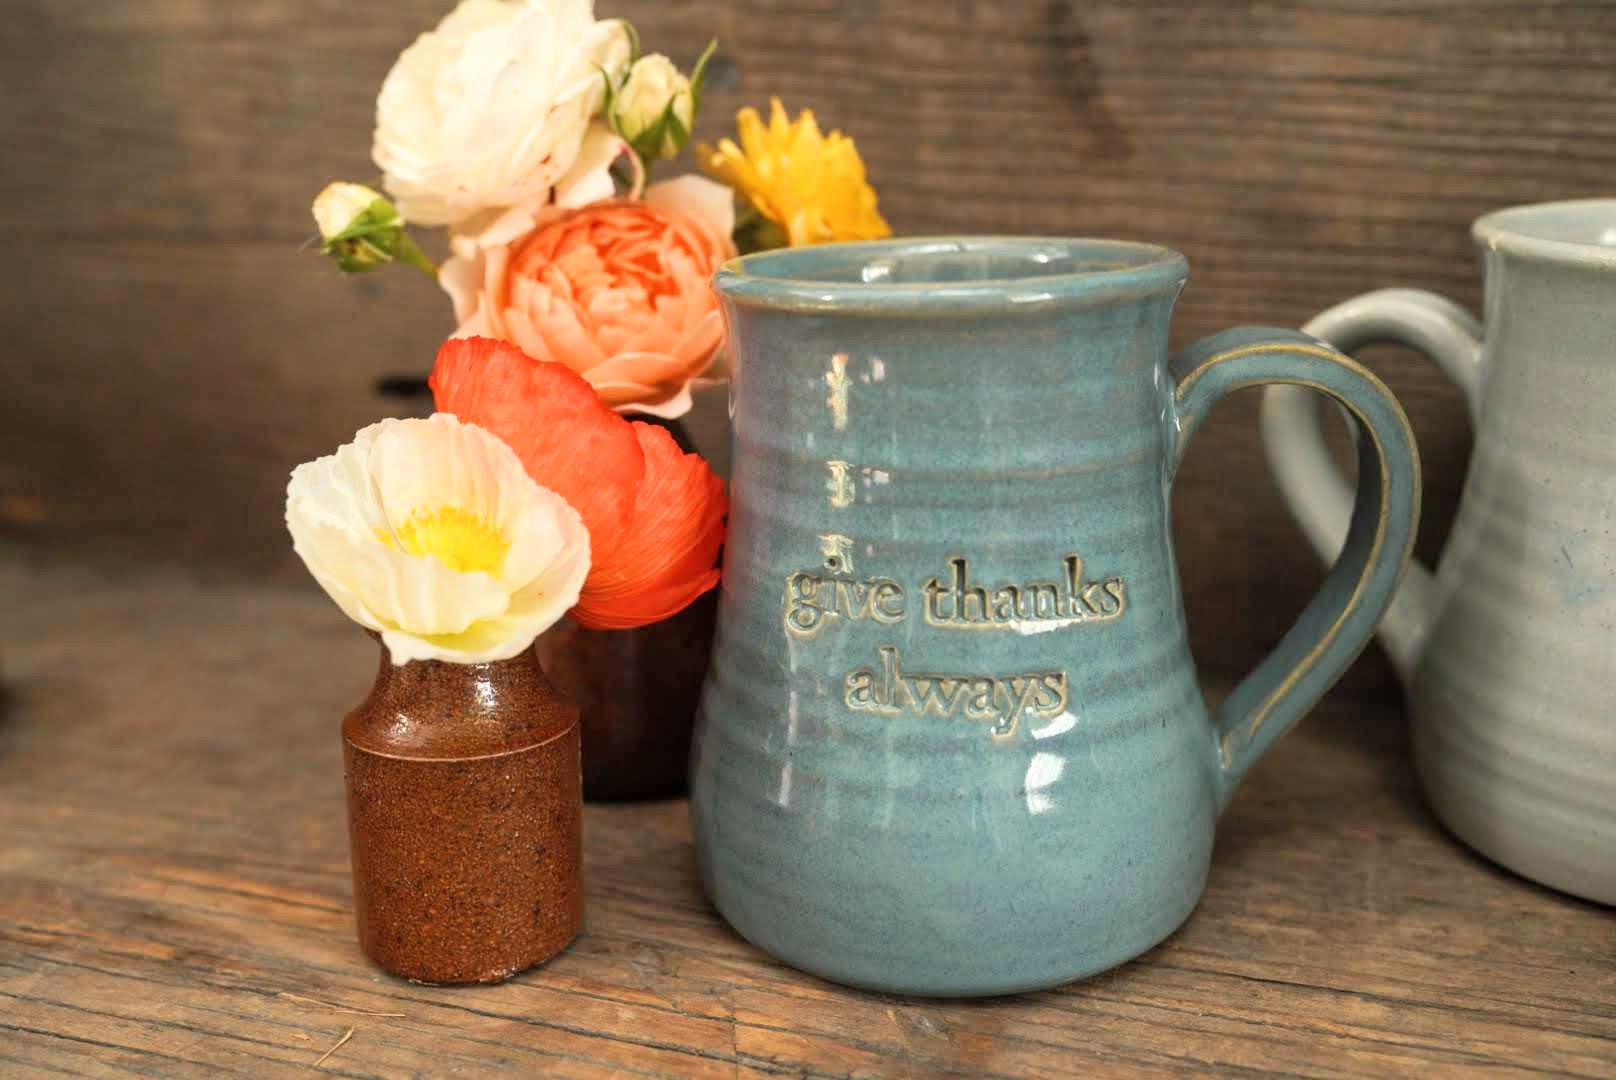 Grateful and Thankful Campfire Coffee Mug - Pretty Collected